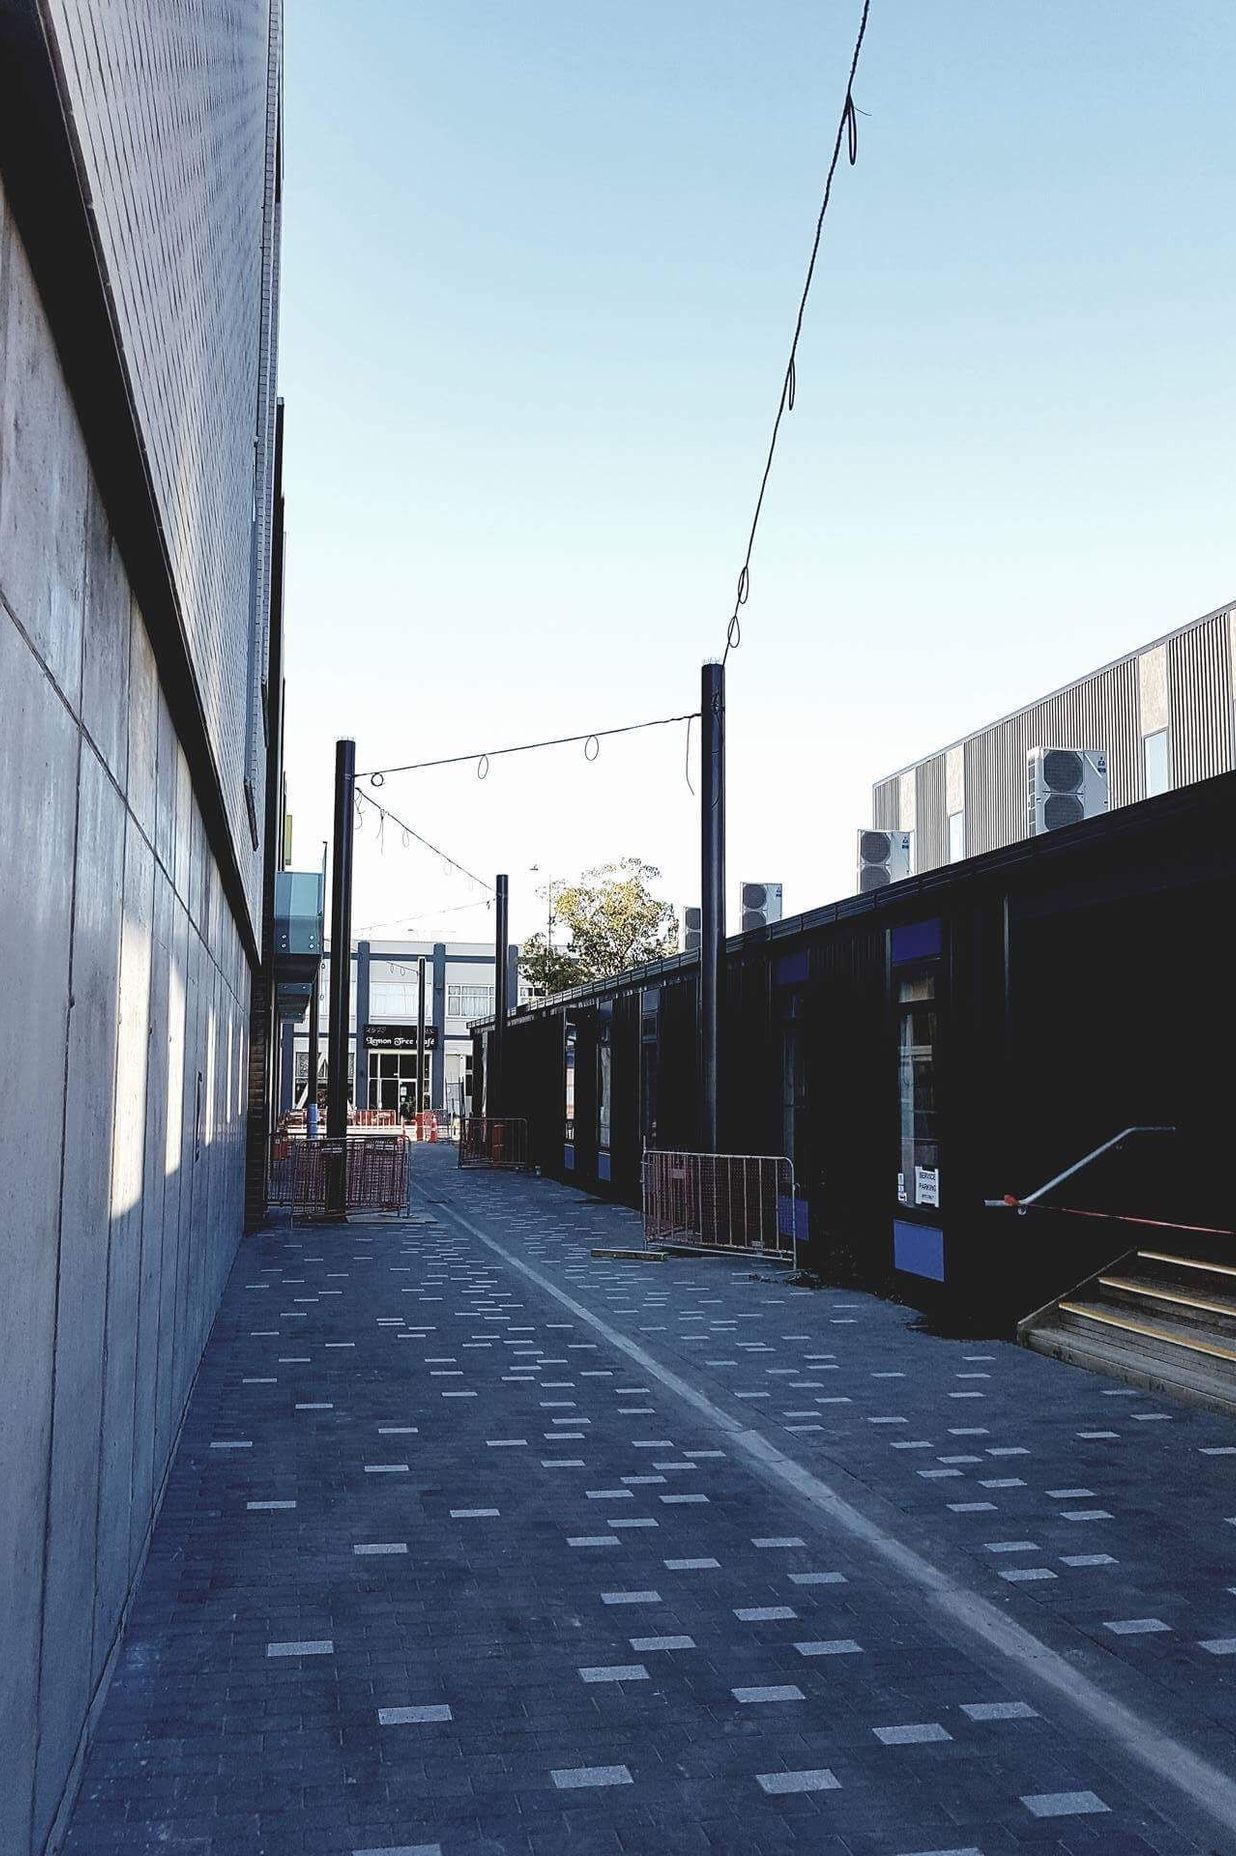 South Frame wire catenary lighting and mesh-infilled walls - Christchurch CBD
